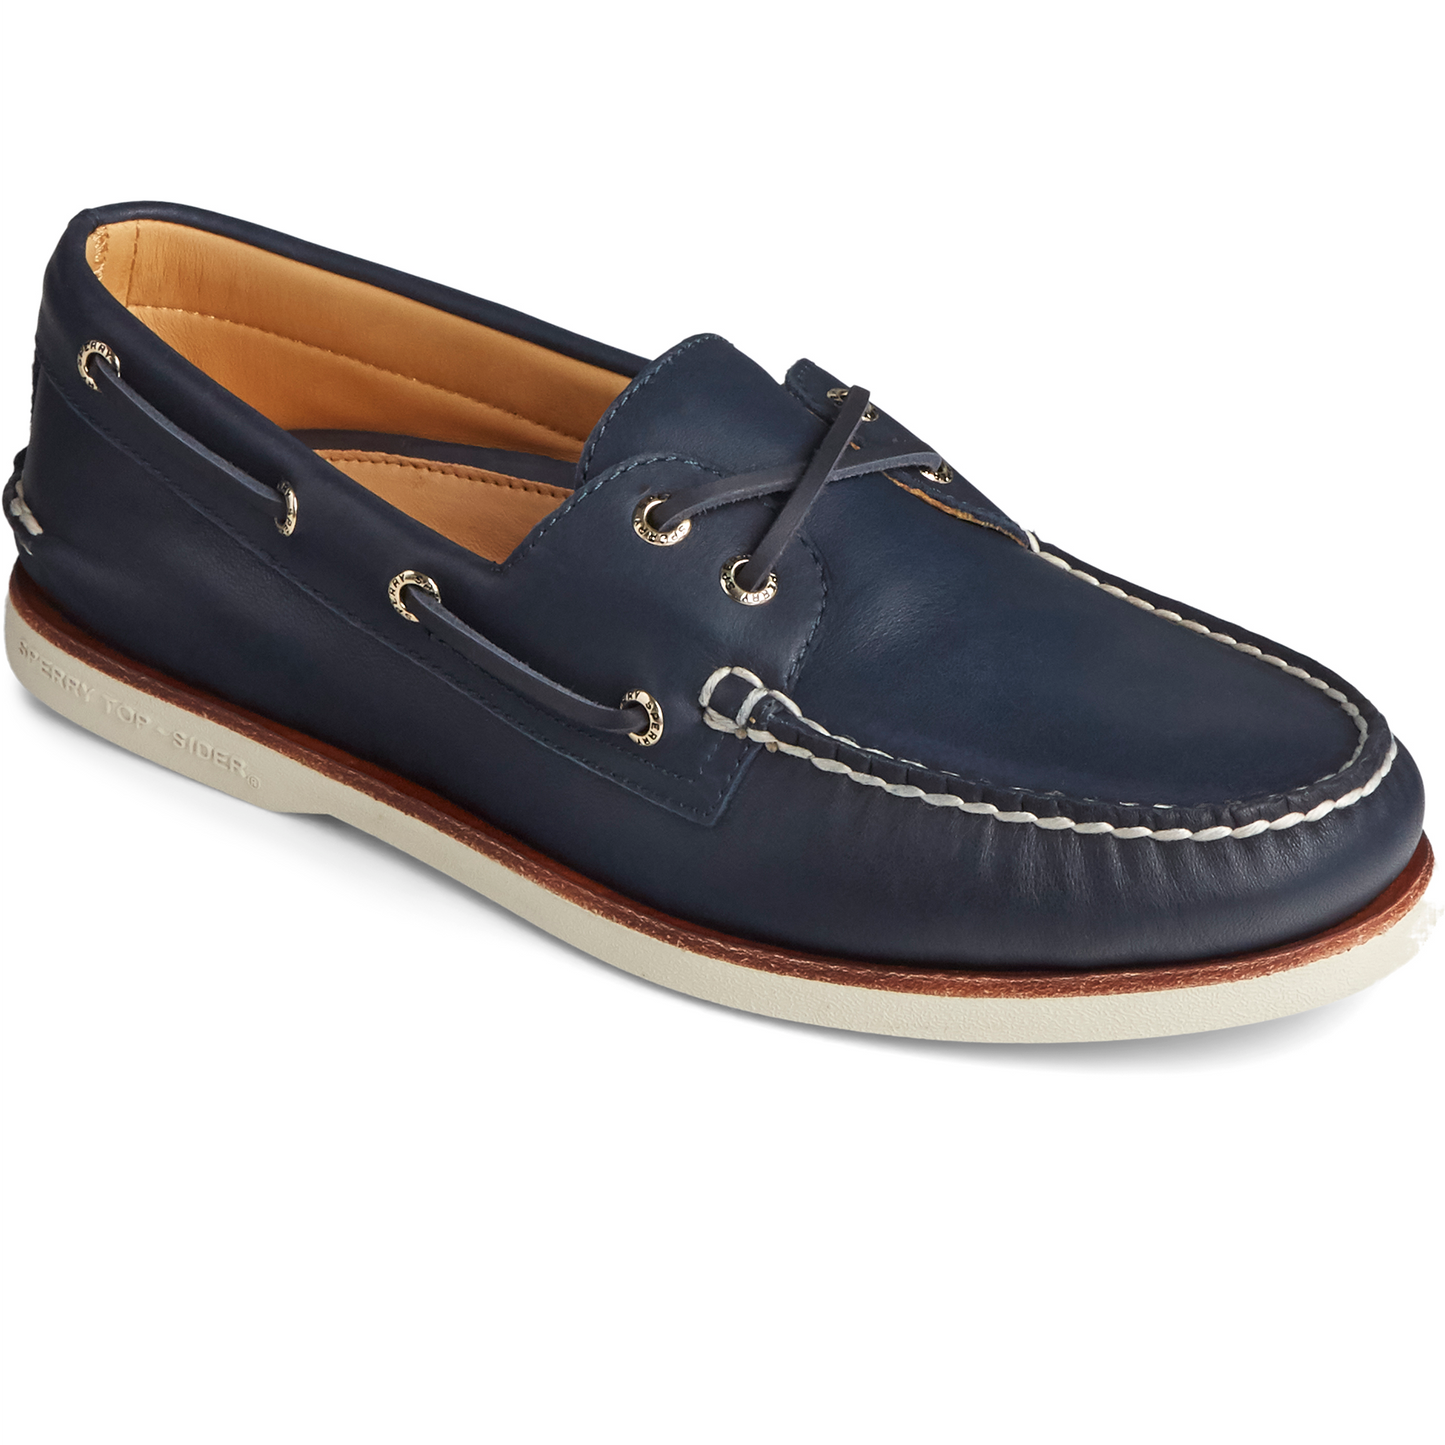 Sperry Men's Gold Cup Authentic Original  Glove Leather Boat Shoe - Navy (STS22578)